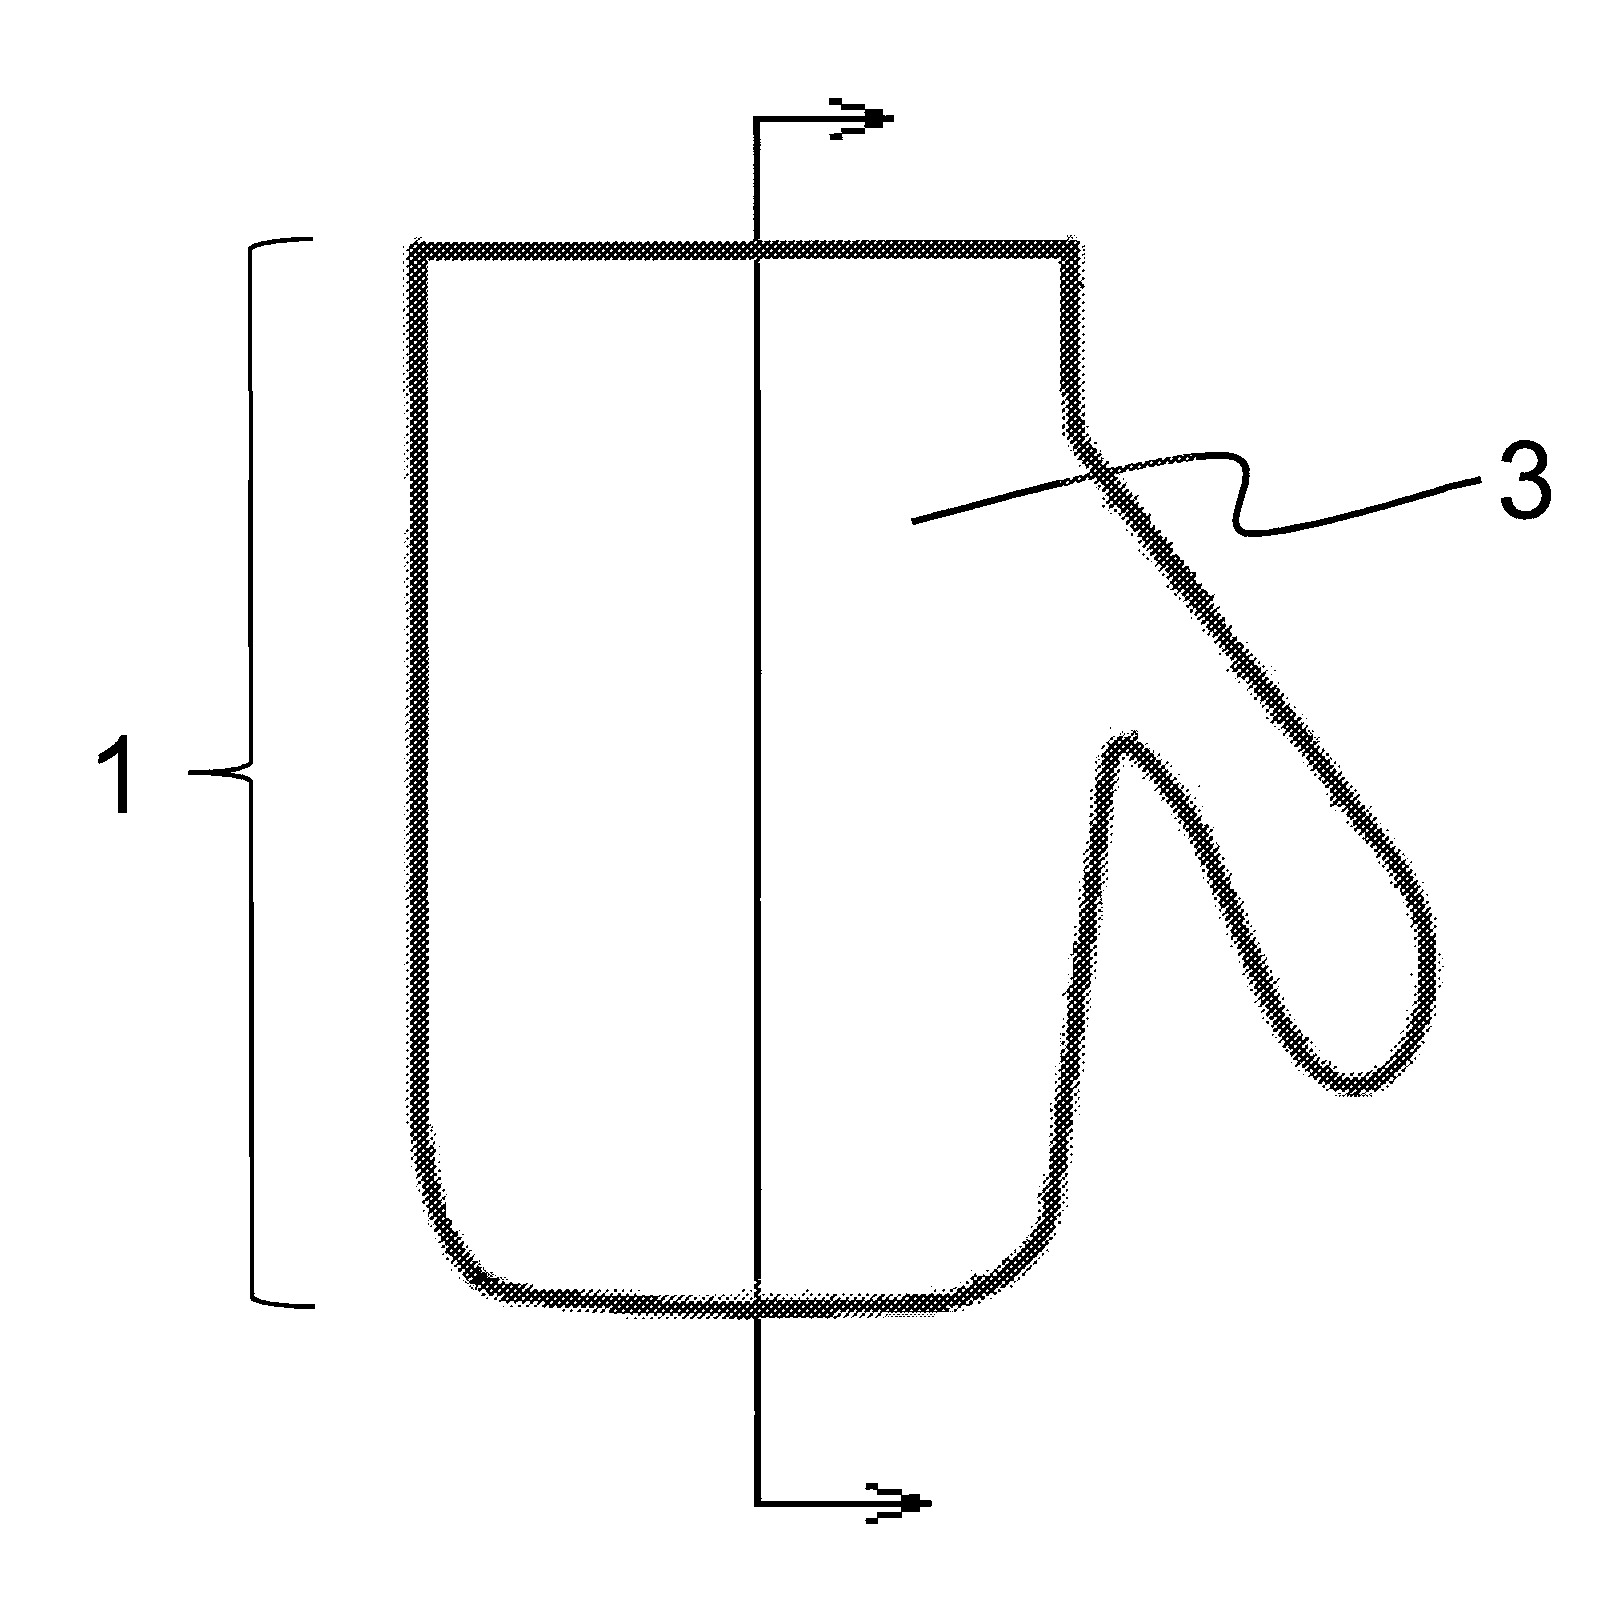 Method for Manufacturing a Waterproof and Breathable Article of Clothing